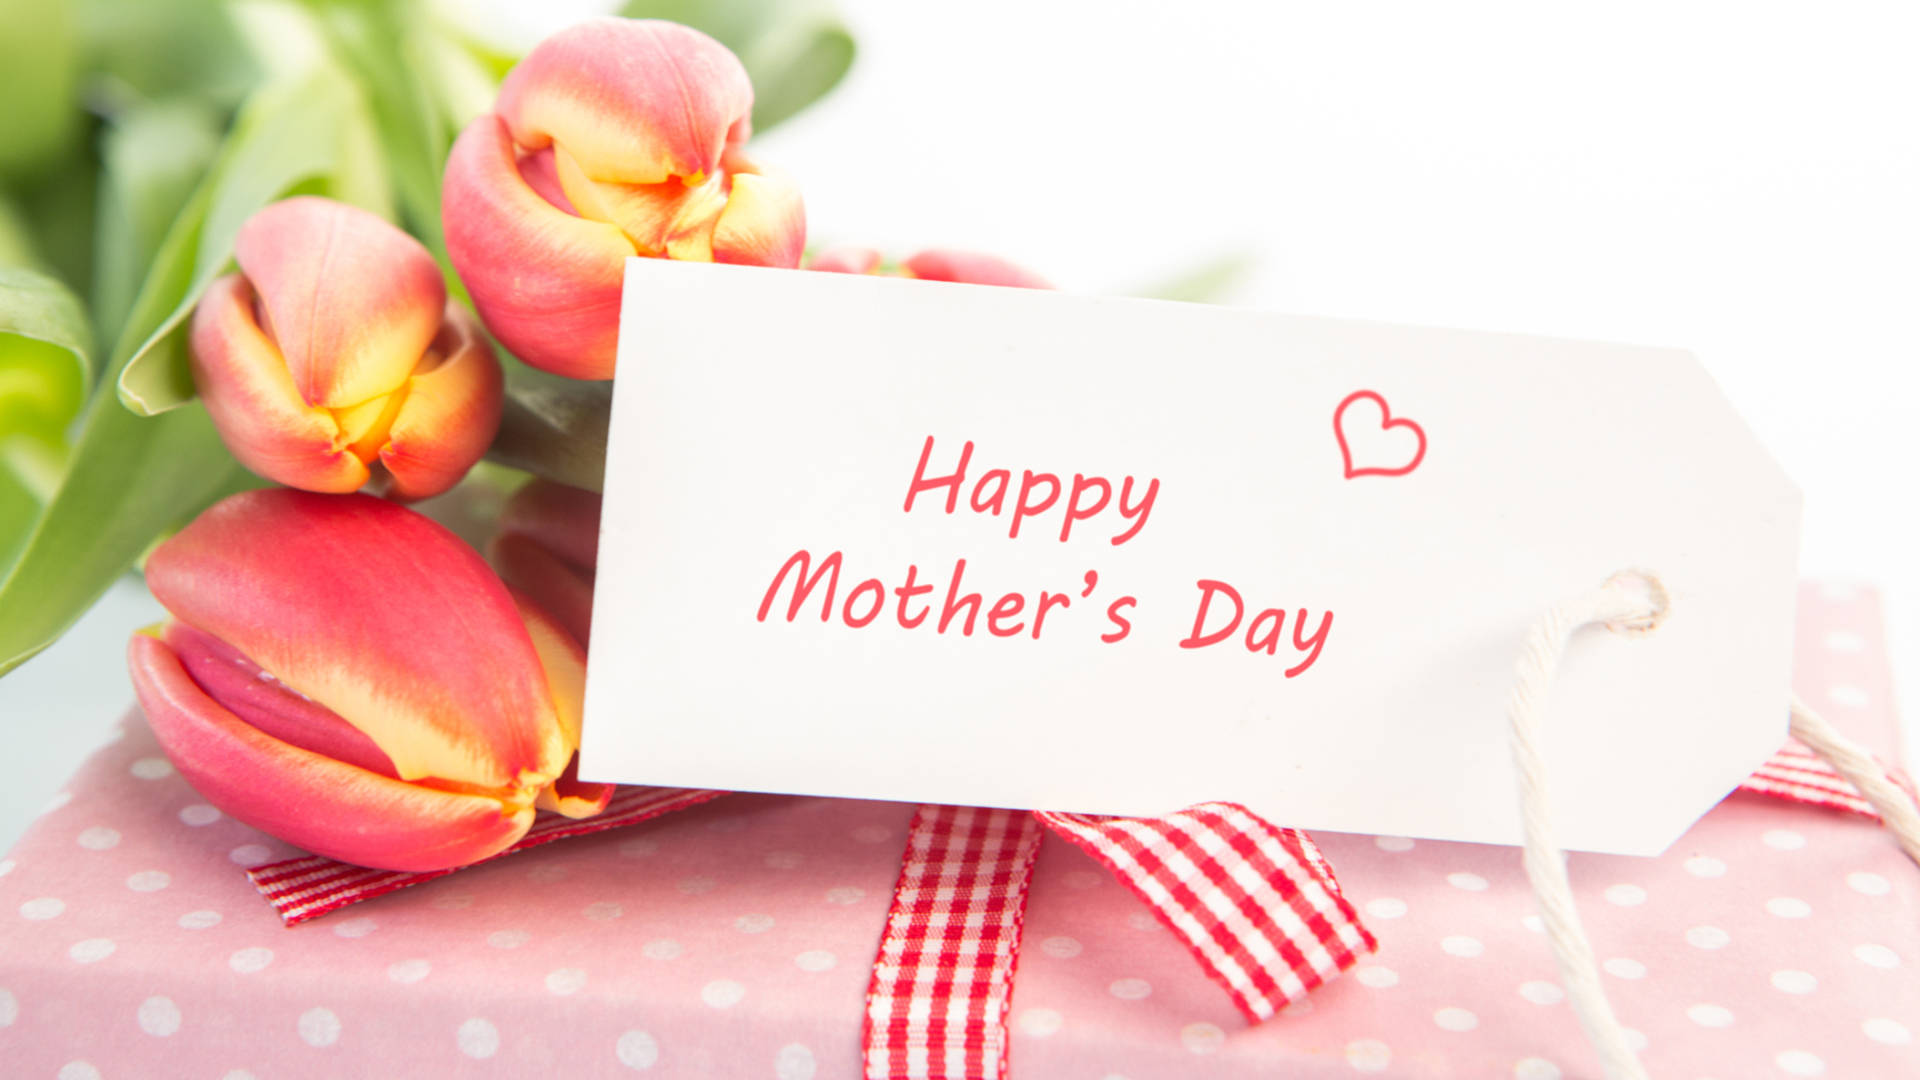 Happy Mothers Day Polka Dot Background